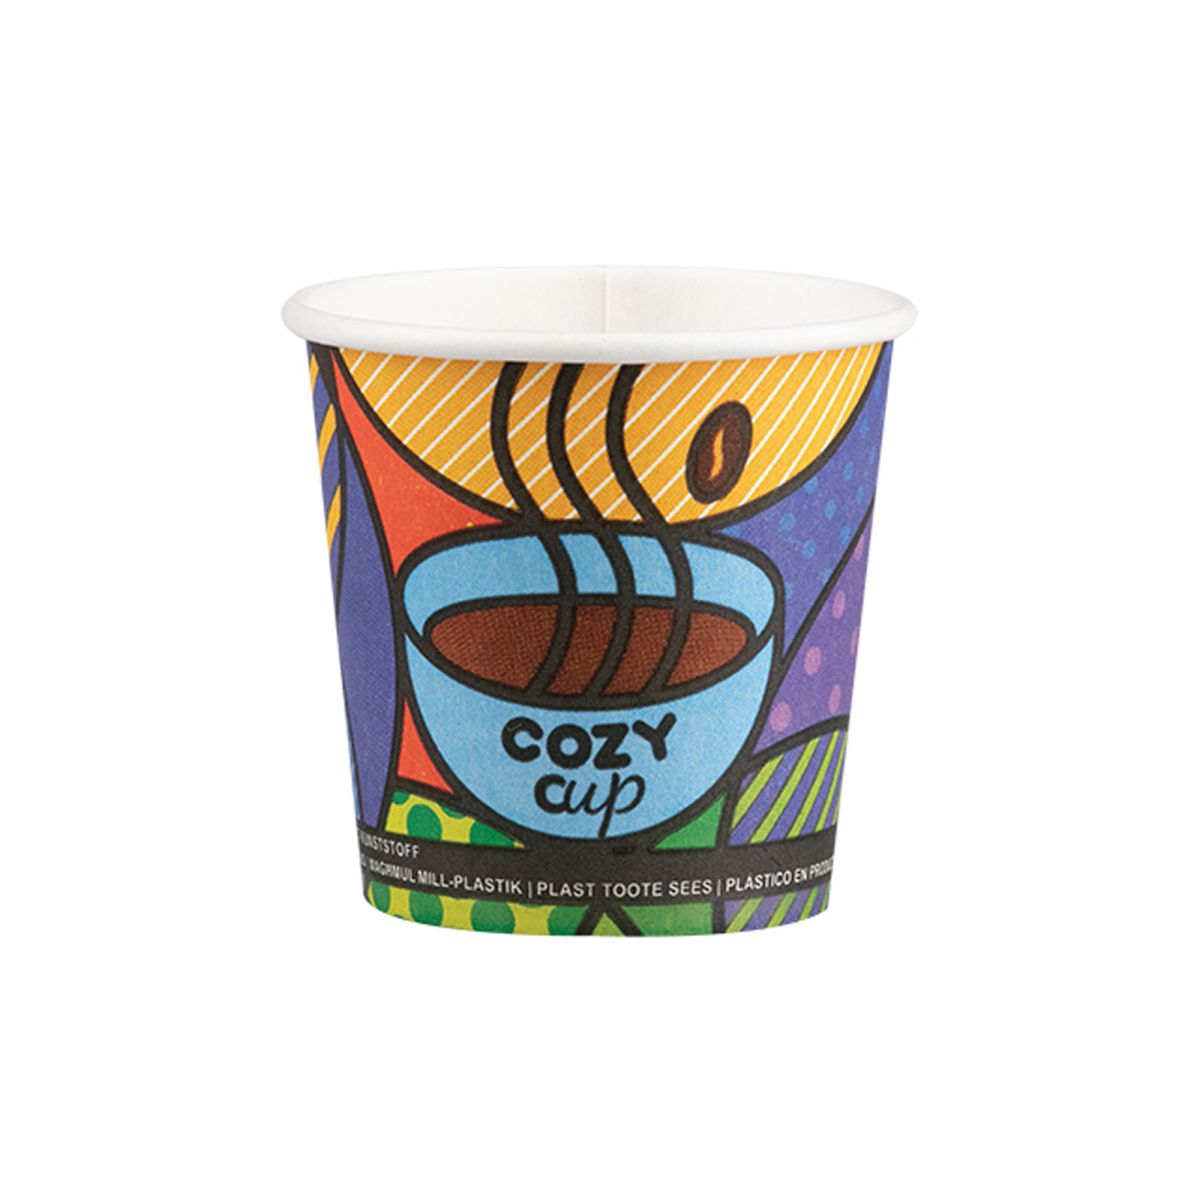 Single Wall Paper Cup Cozy Cup Design